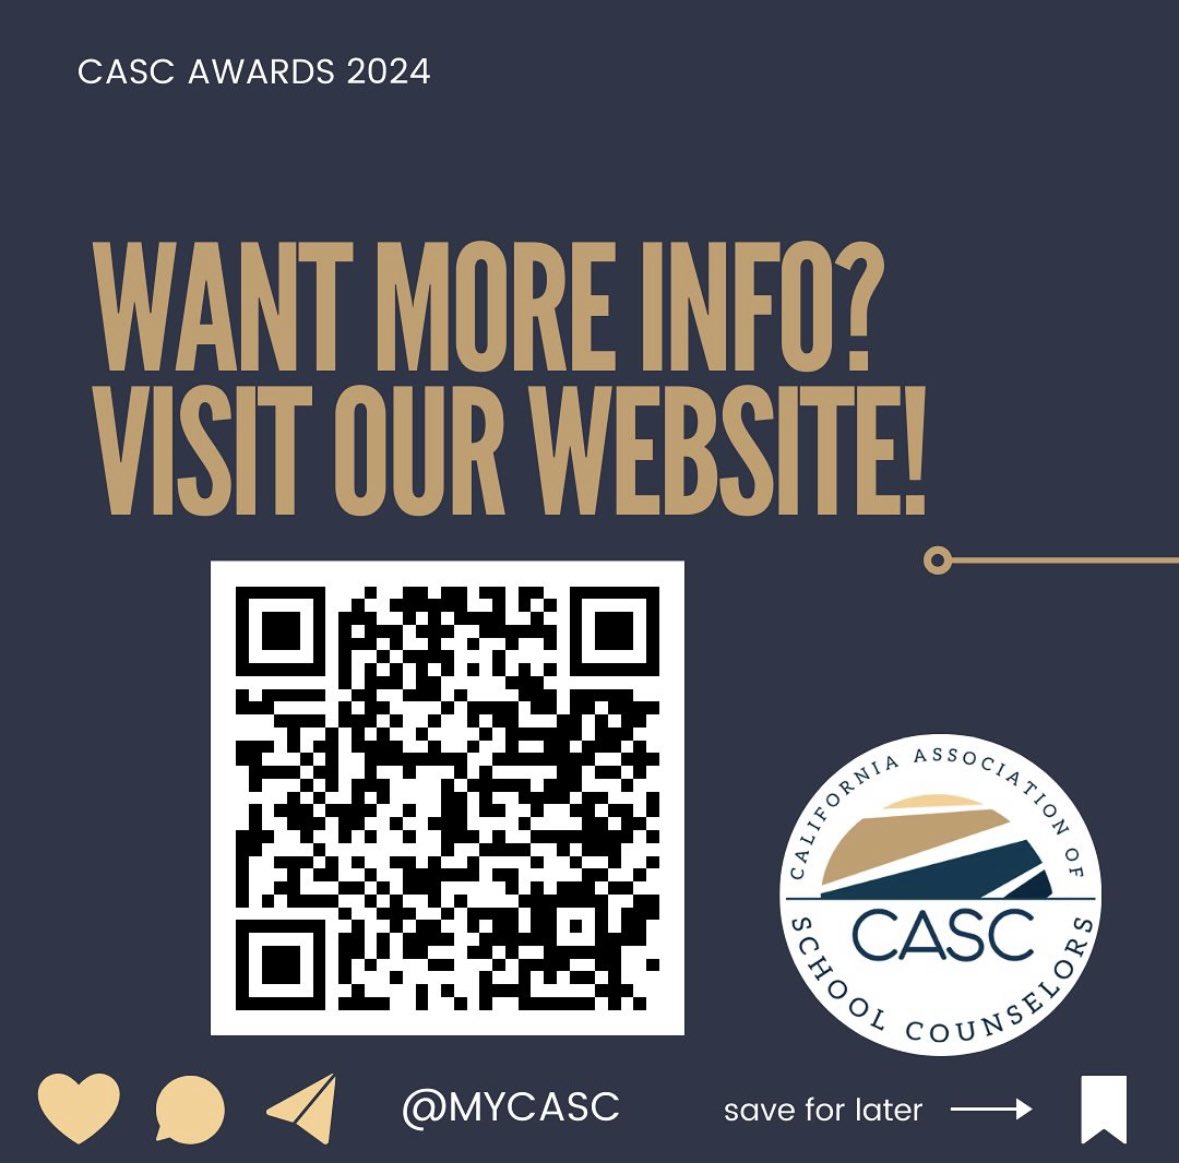 Make sure to nominate someone or yourself by April 15! #cascconnected